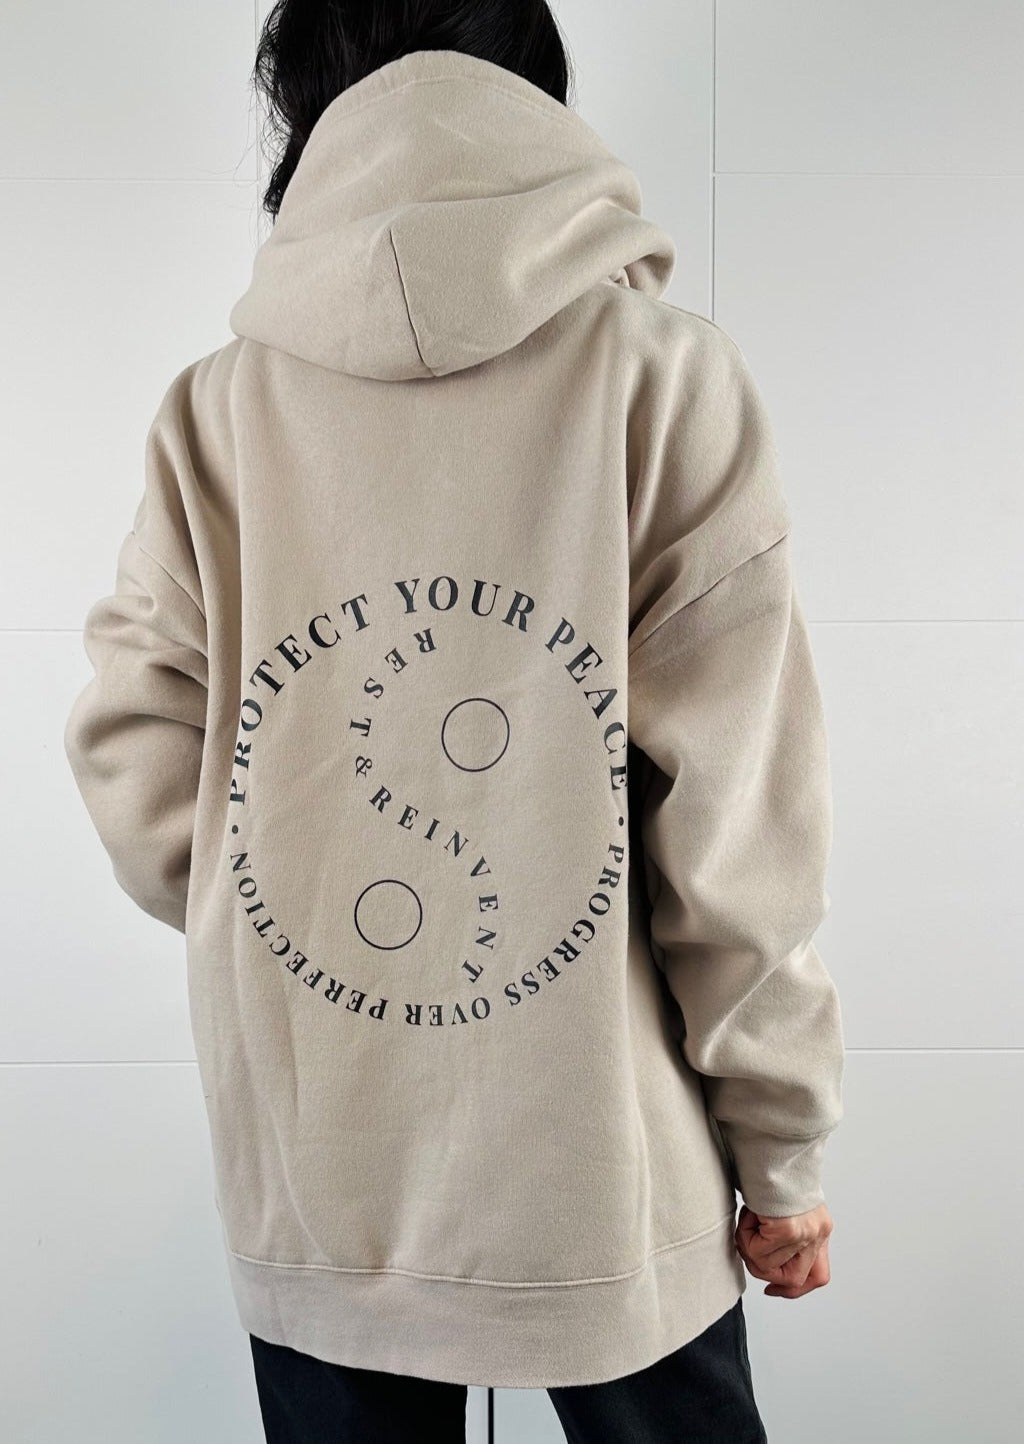 "PROTECT YOUR PEACE" BIG SISTER HOODIE